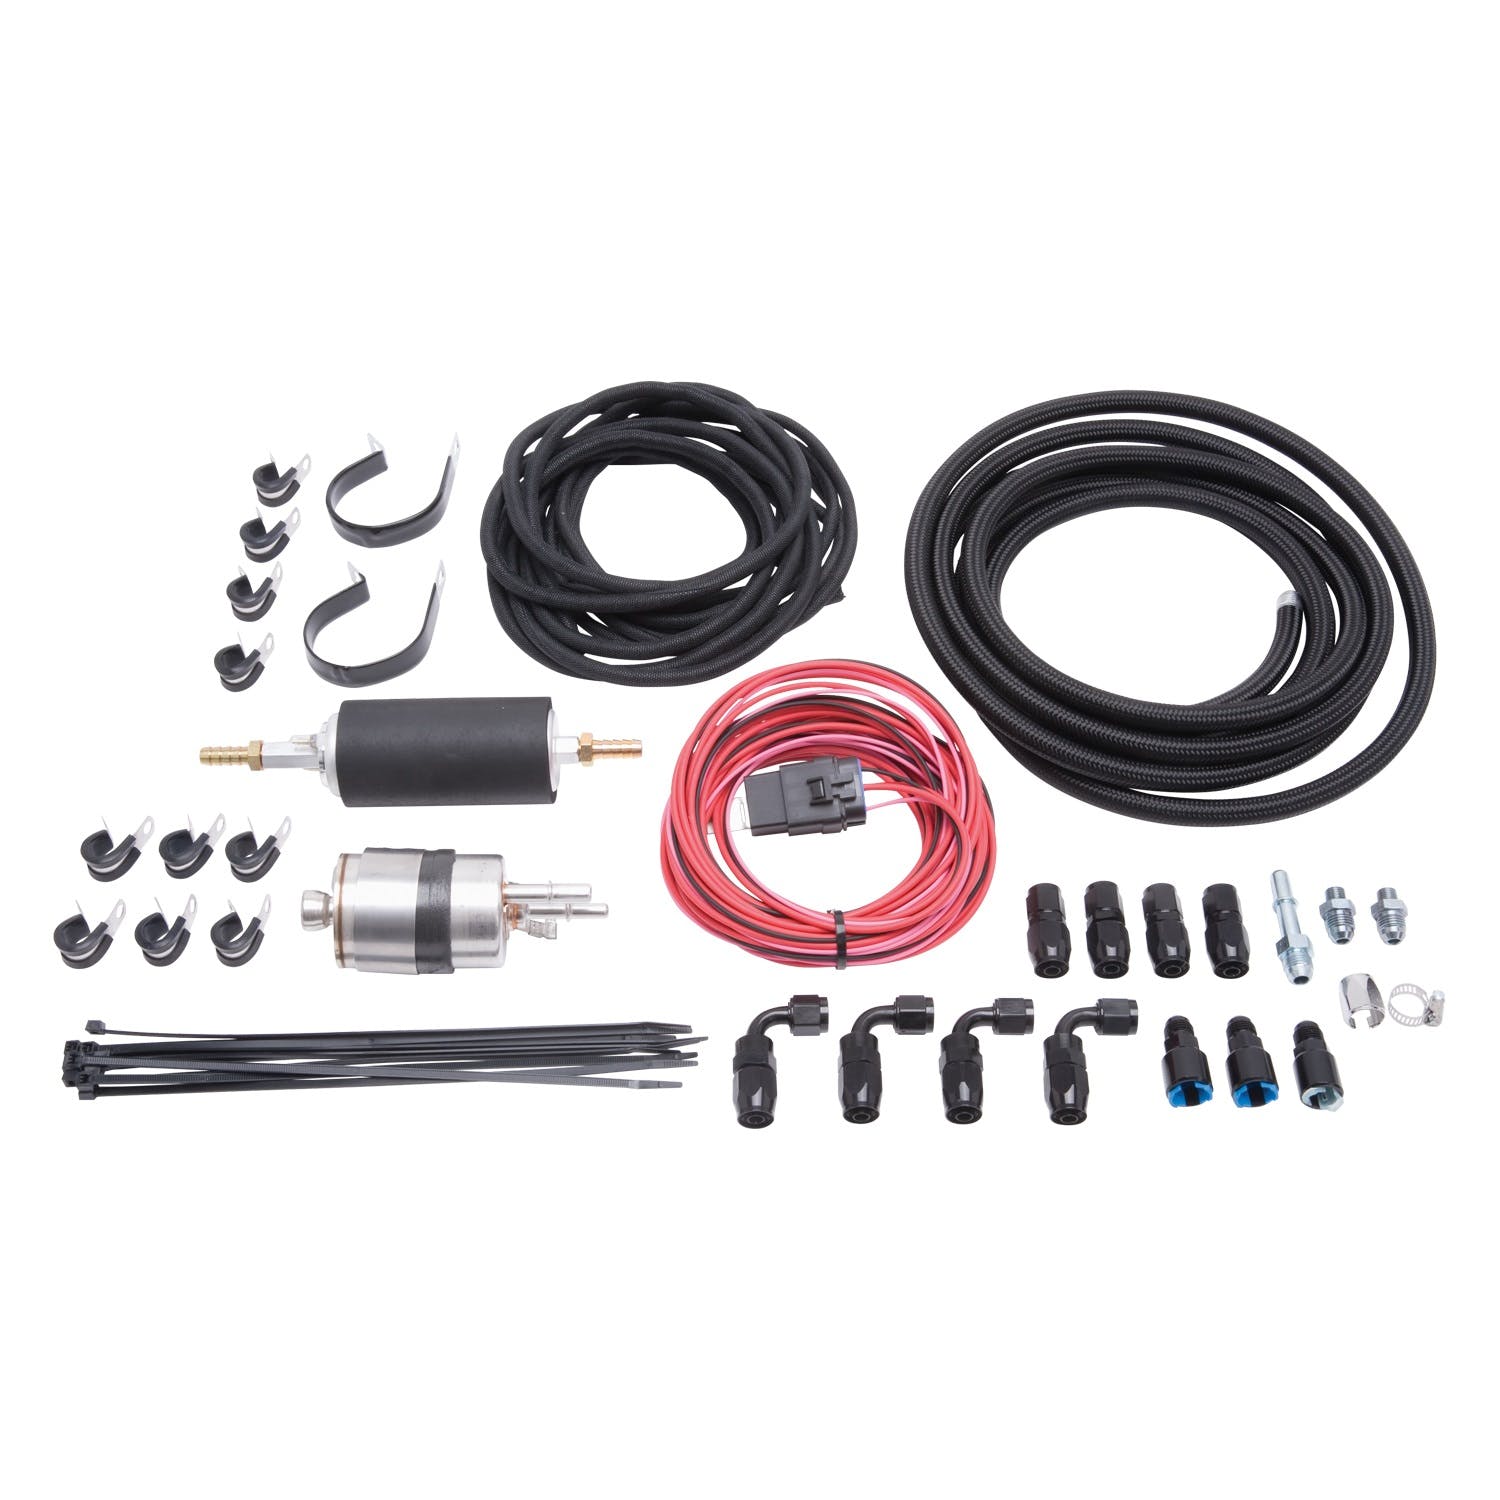 Russell 641605 Complete Fuel System Kit